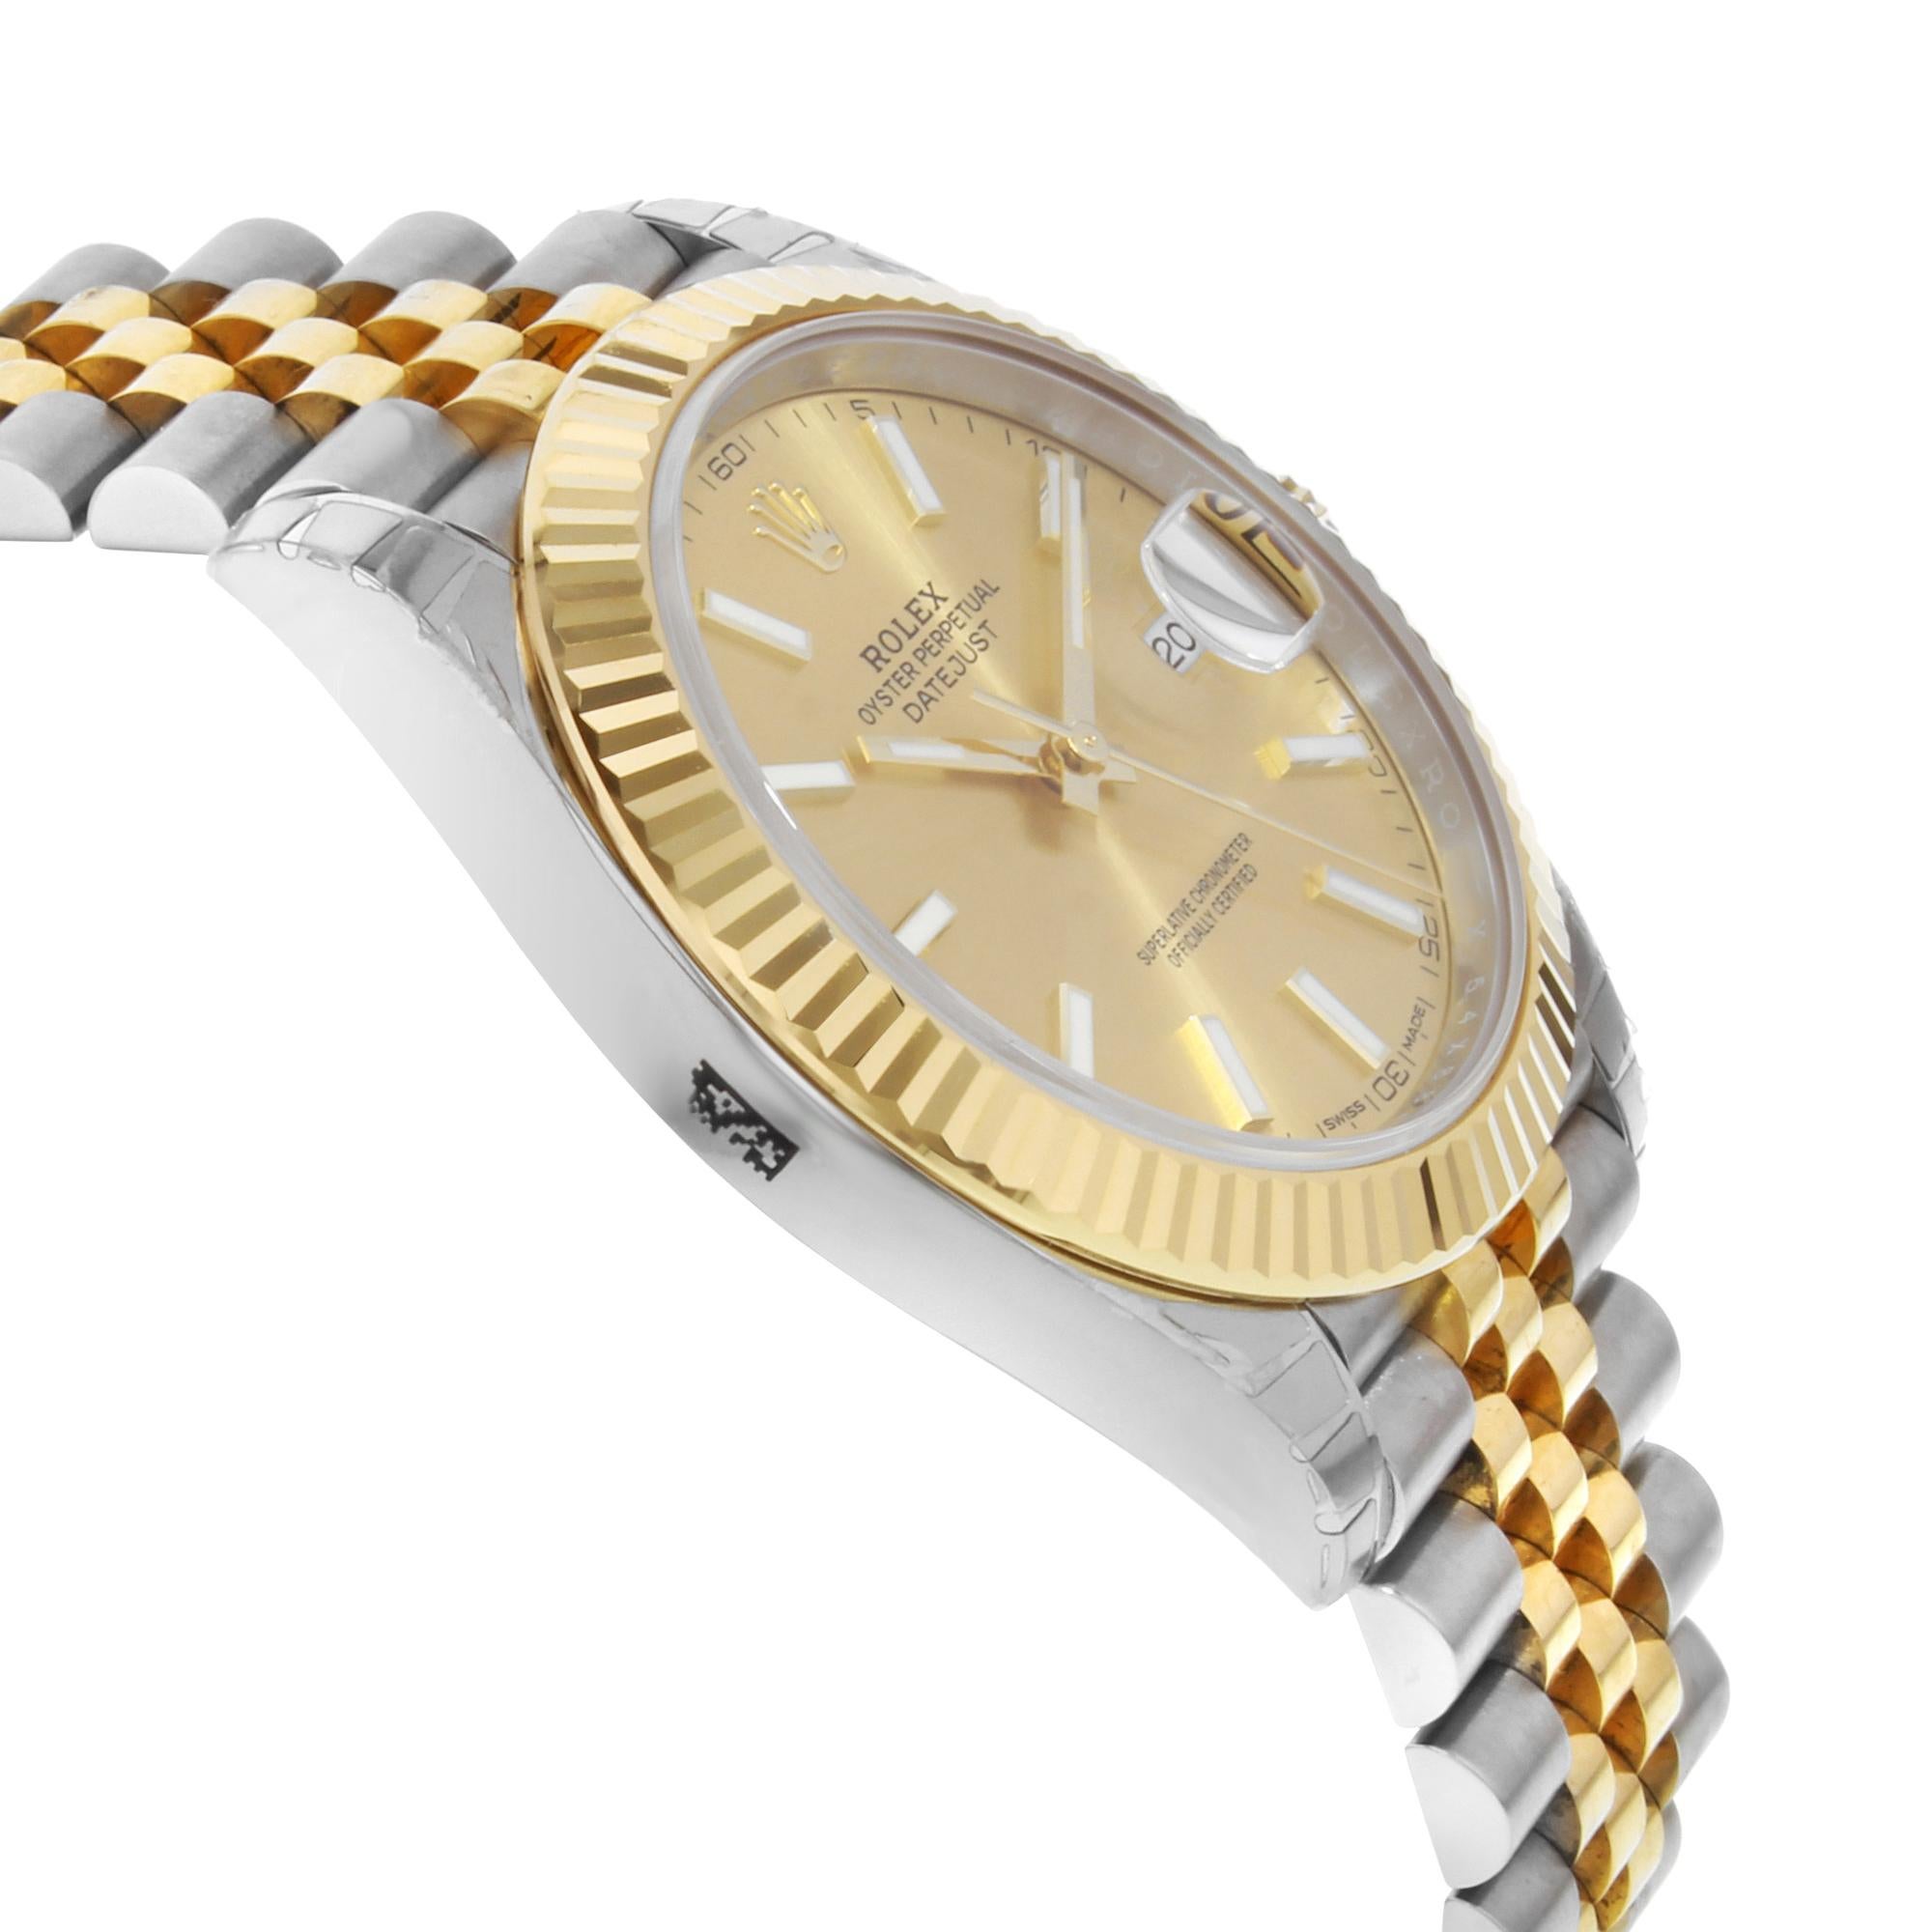 datejust 41 champagne dial